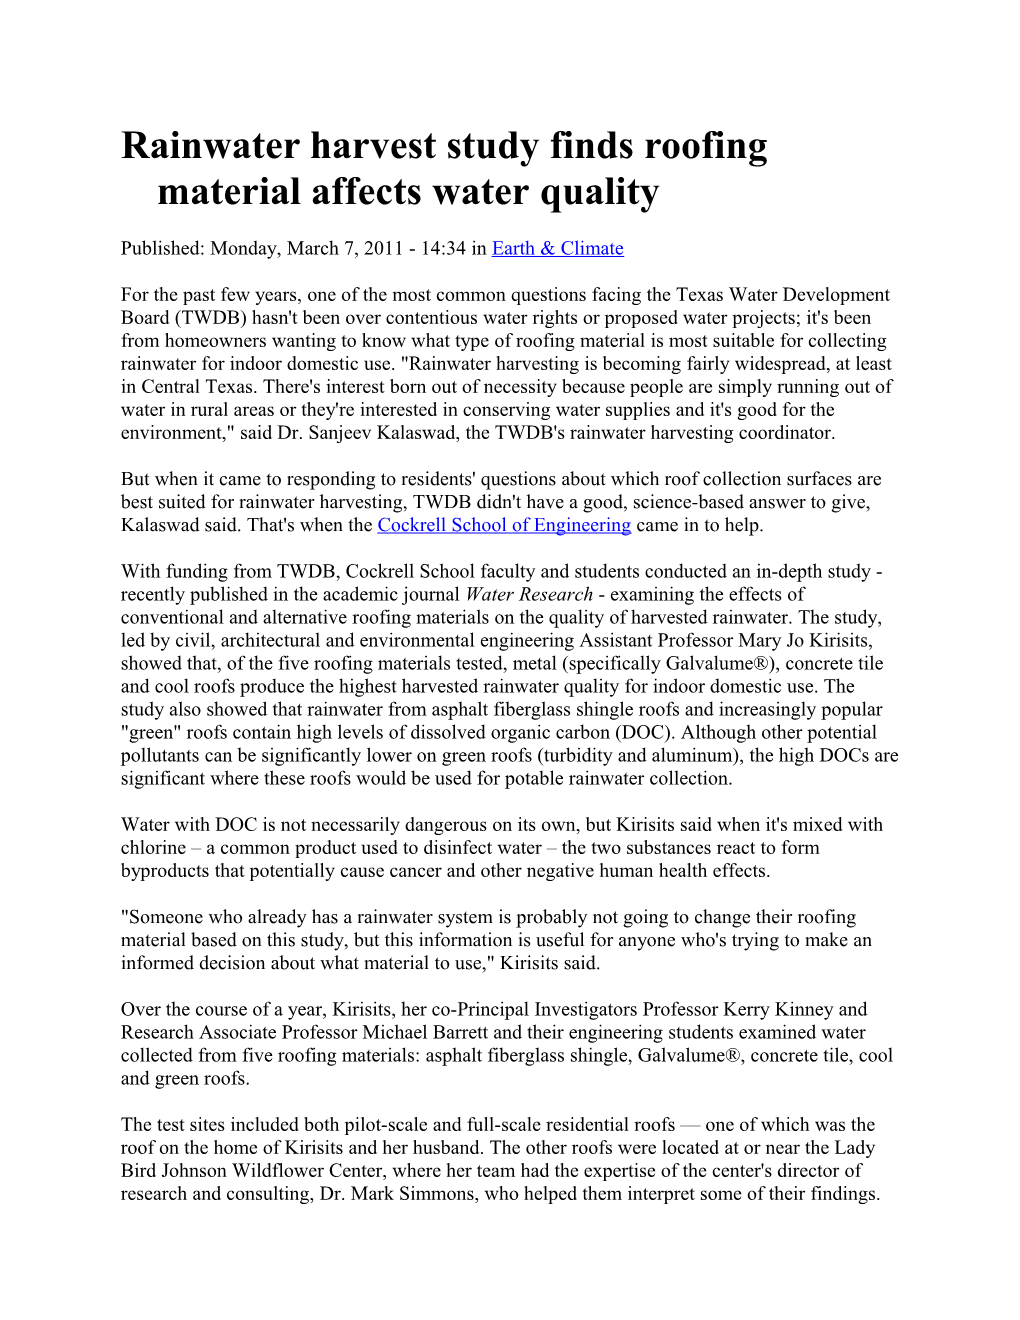 Rainwater Harvest Study Finds Roofing Material Affects Water Quality